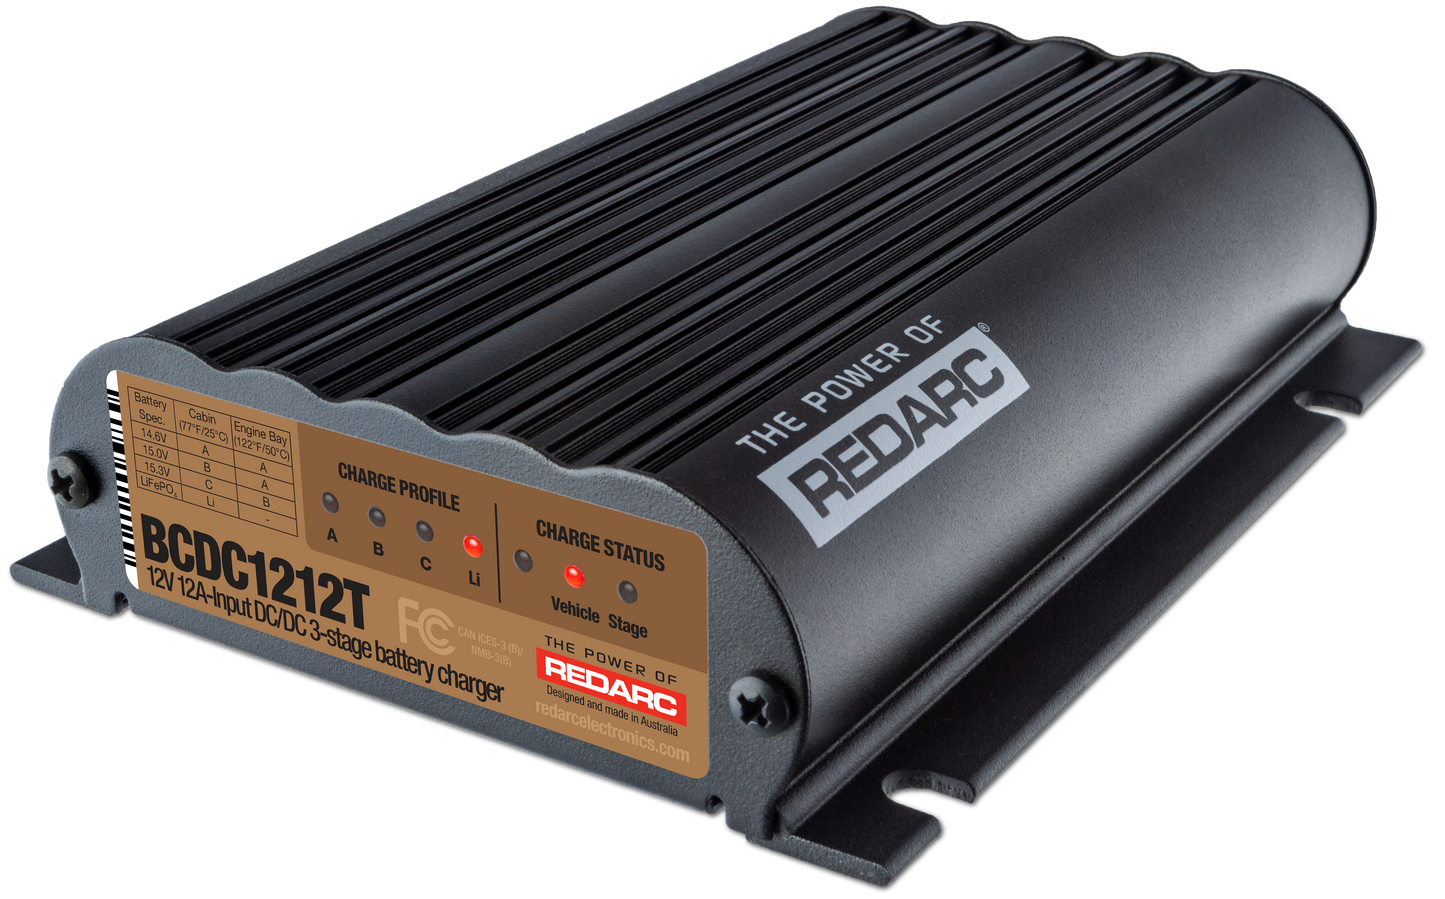 REDARC 12A TRAILER BATTERY CHARGER BCDC1212T